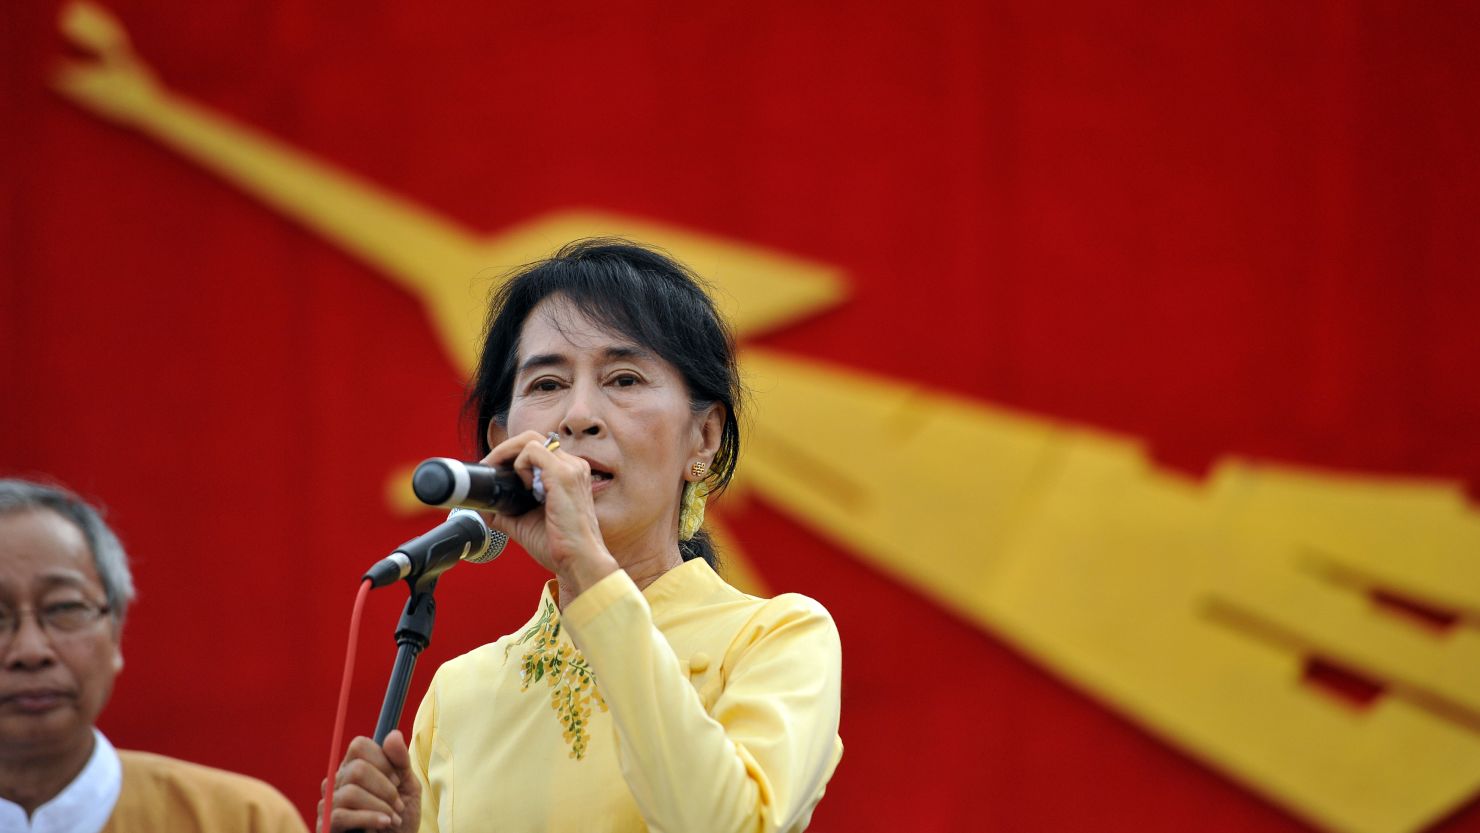 Myanmar opposition leader Aung San Suu Kyi pays a visit to her constituency in Kawhmu outside Yangon on Tuesday.